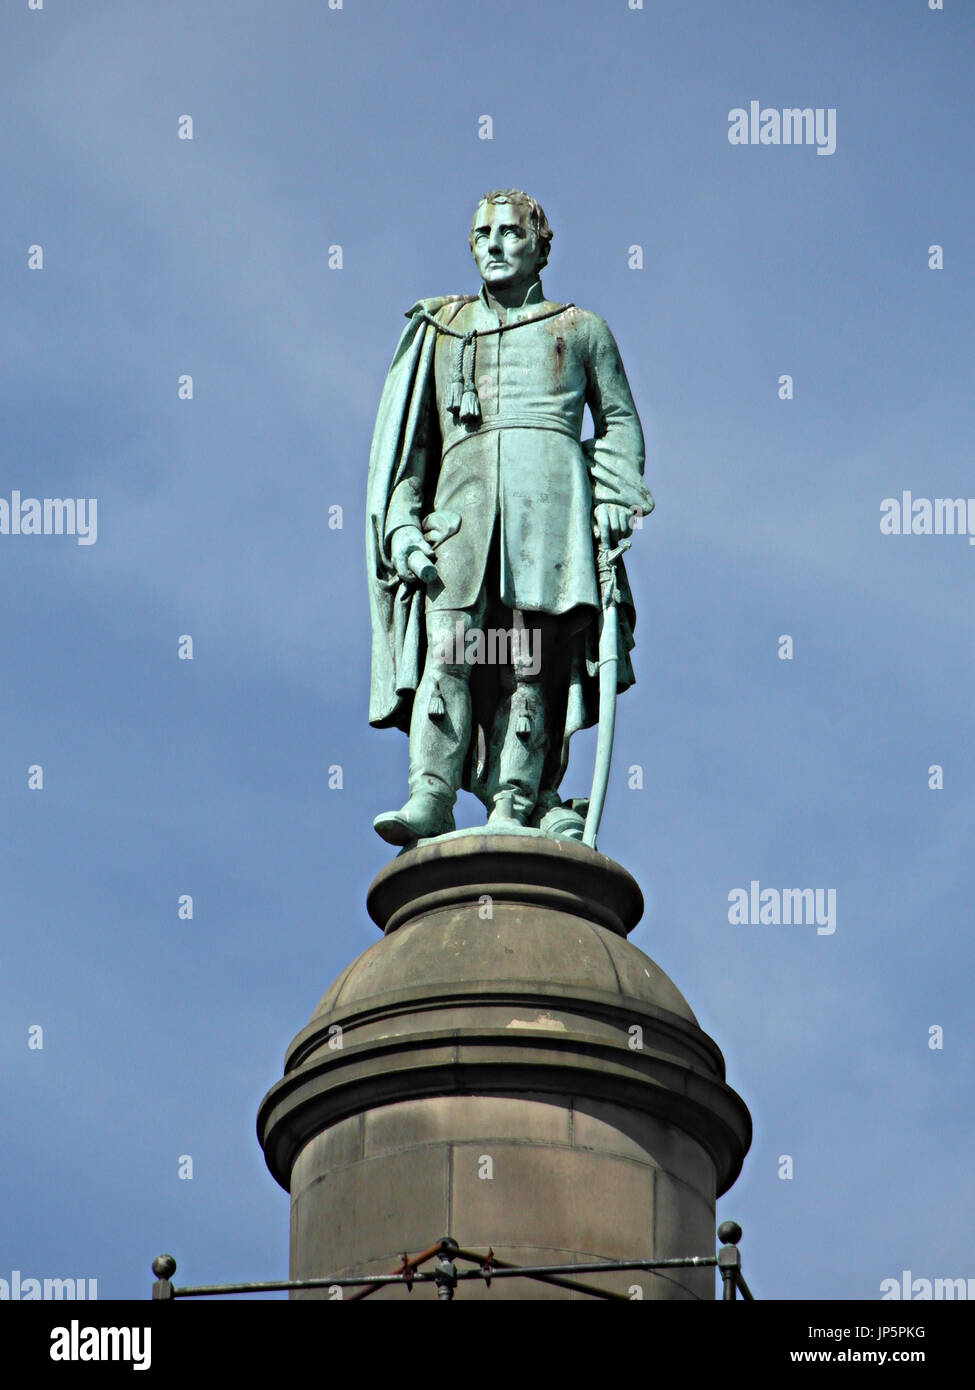 Statue of the Duke of Wellington, supposedly cast from cannon captured at the Battle of Waterloo, 18 June 1815. Located at Wm Brown Street, Liverpool. Stock Photo